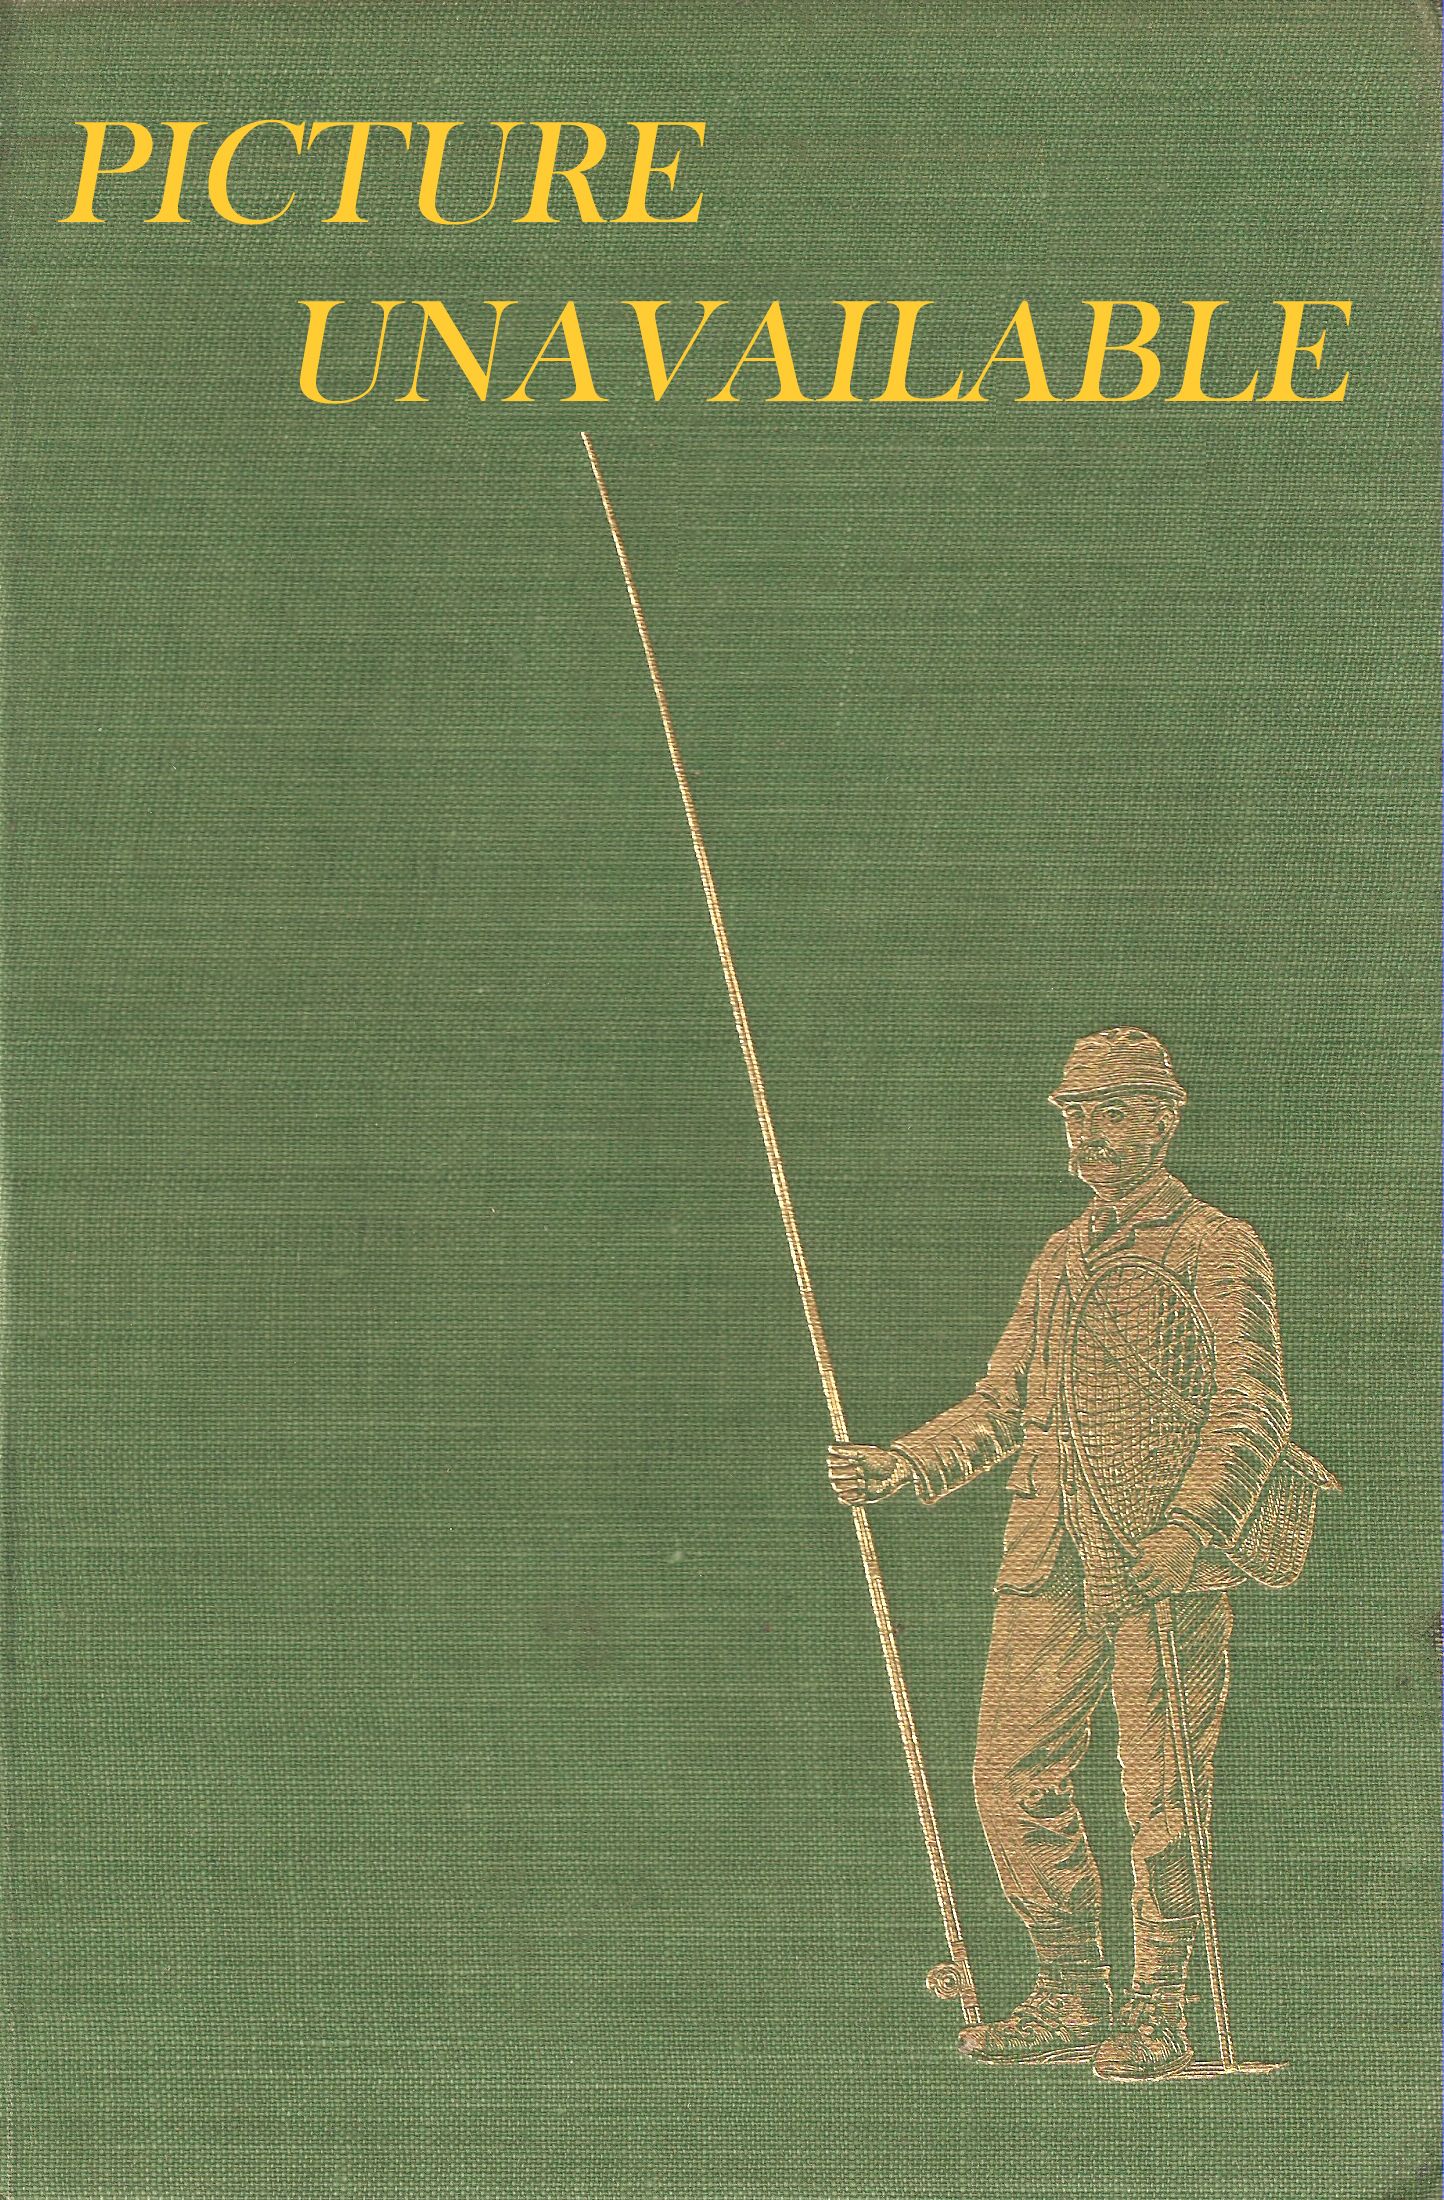 FISHING IN MID-WALES: A PRACTICAL GUIDE. By Walter M. Gallichan.